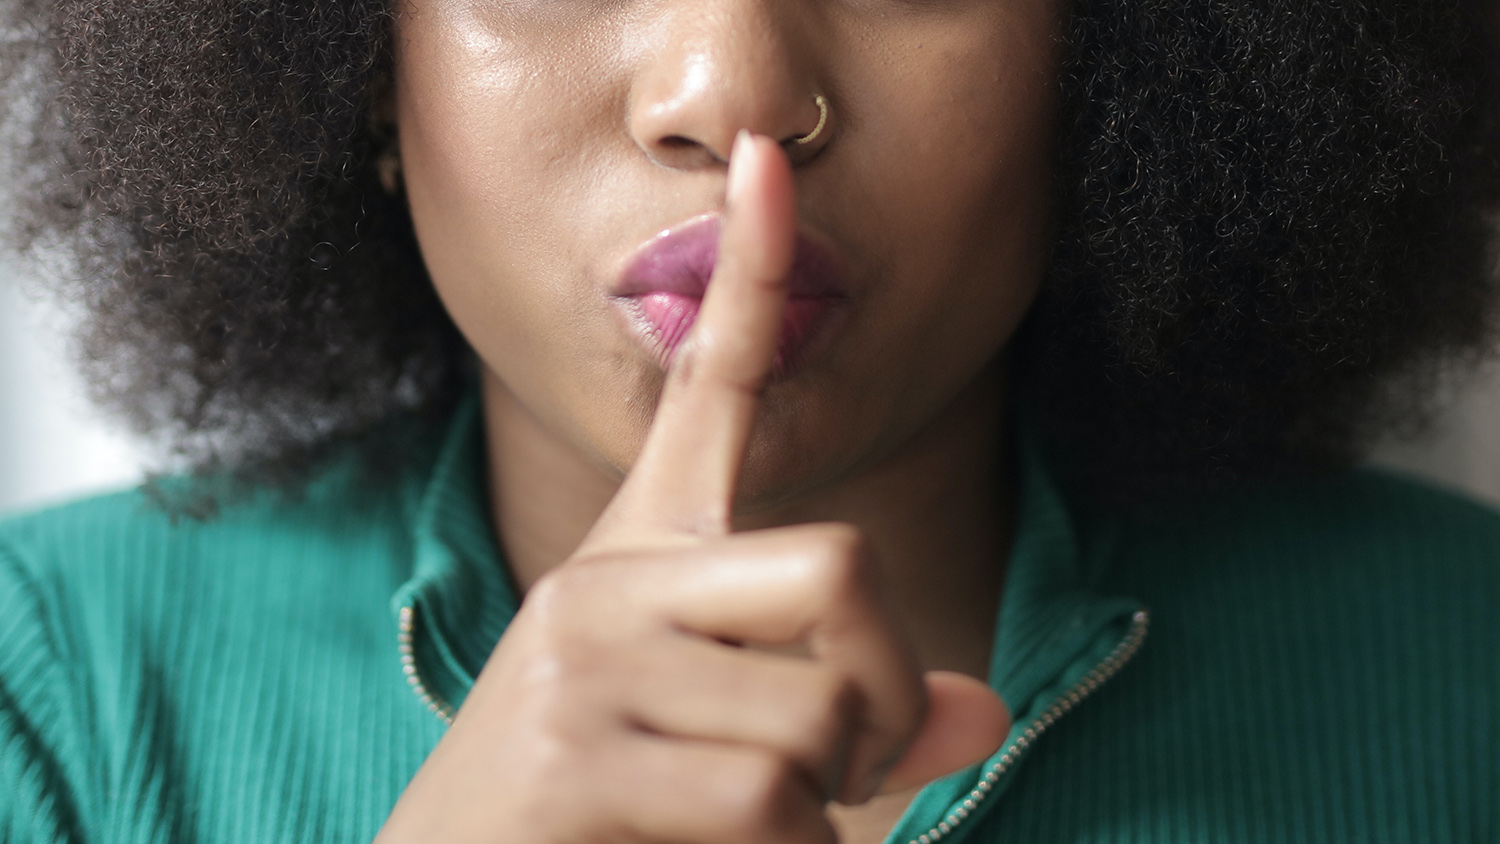 A woman holds a finger over her mouth, "shh"